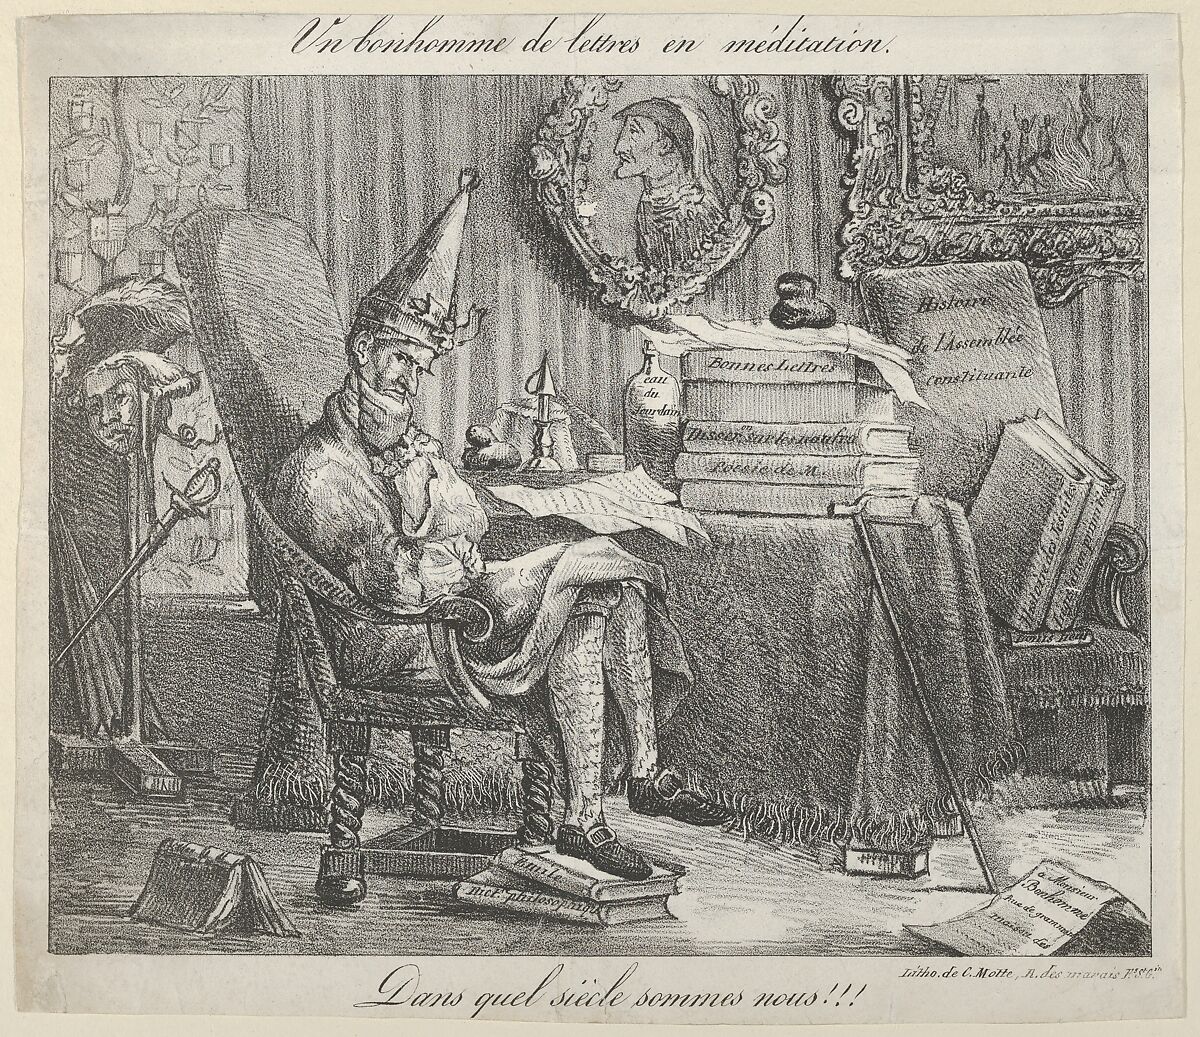 A Literary Fellow Meditating, Eugène Delacroix (French, Charenton-Saint-Maurice 1798–1863 Paris), Lithograph; second state of three 